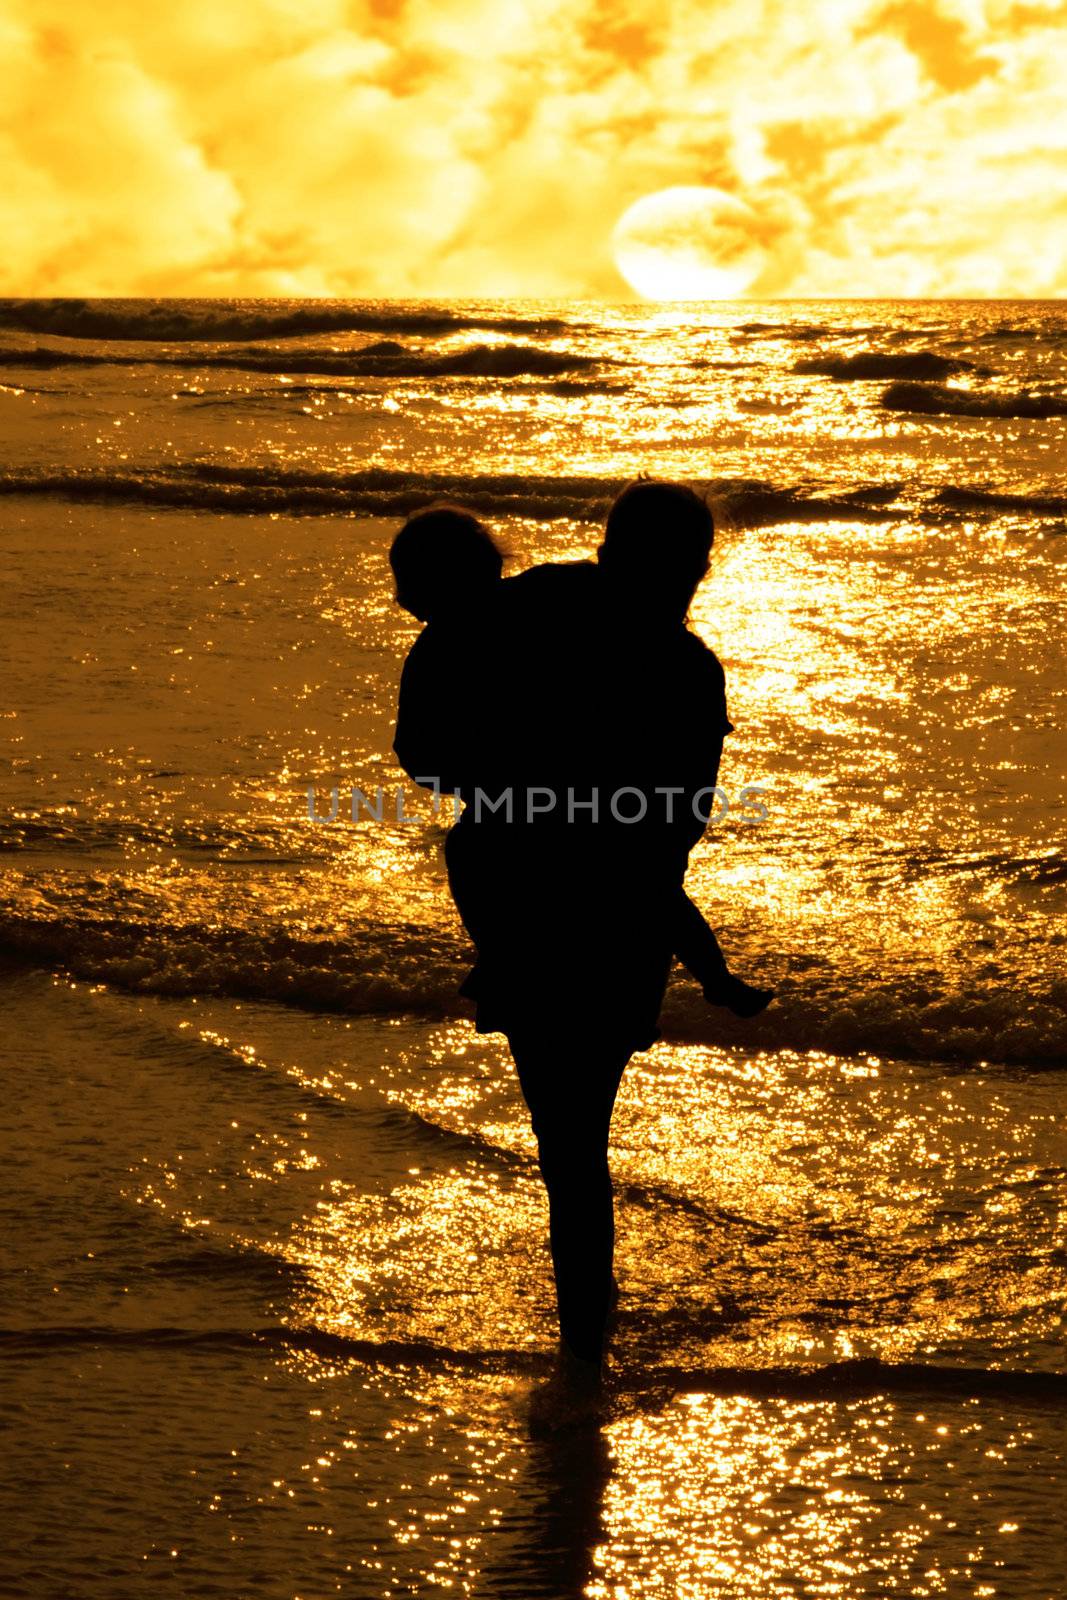 two girls in silhouette against a golden sunset one holding up the over with affection